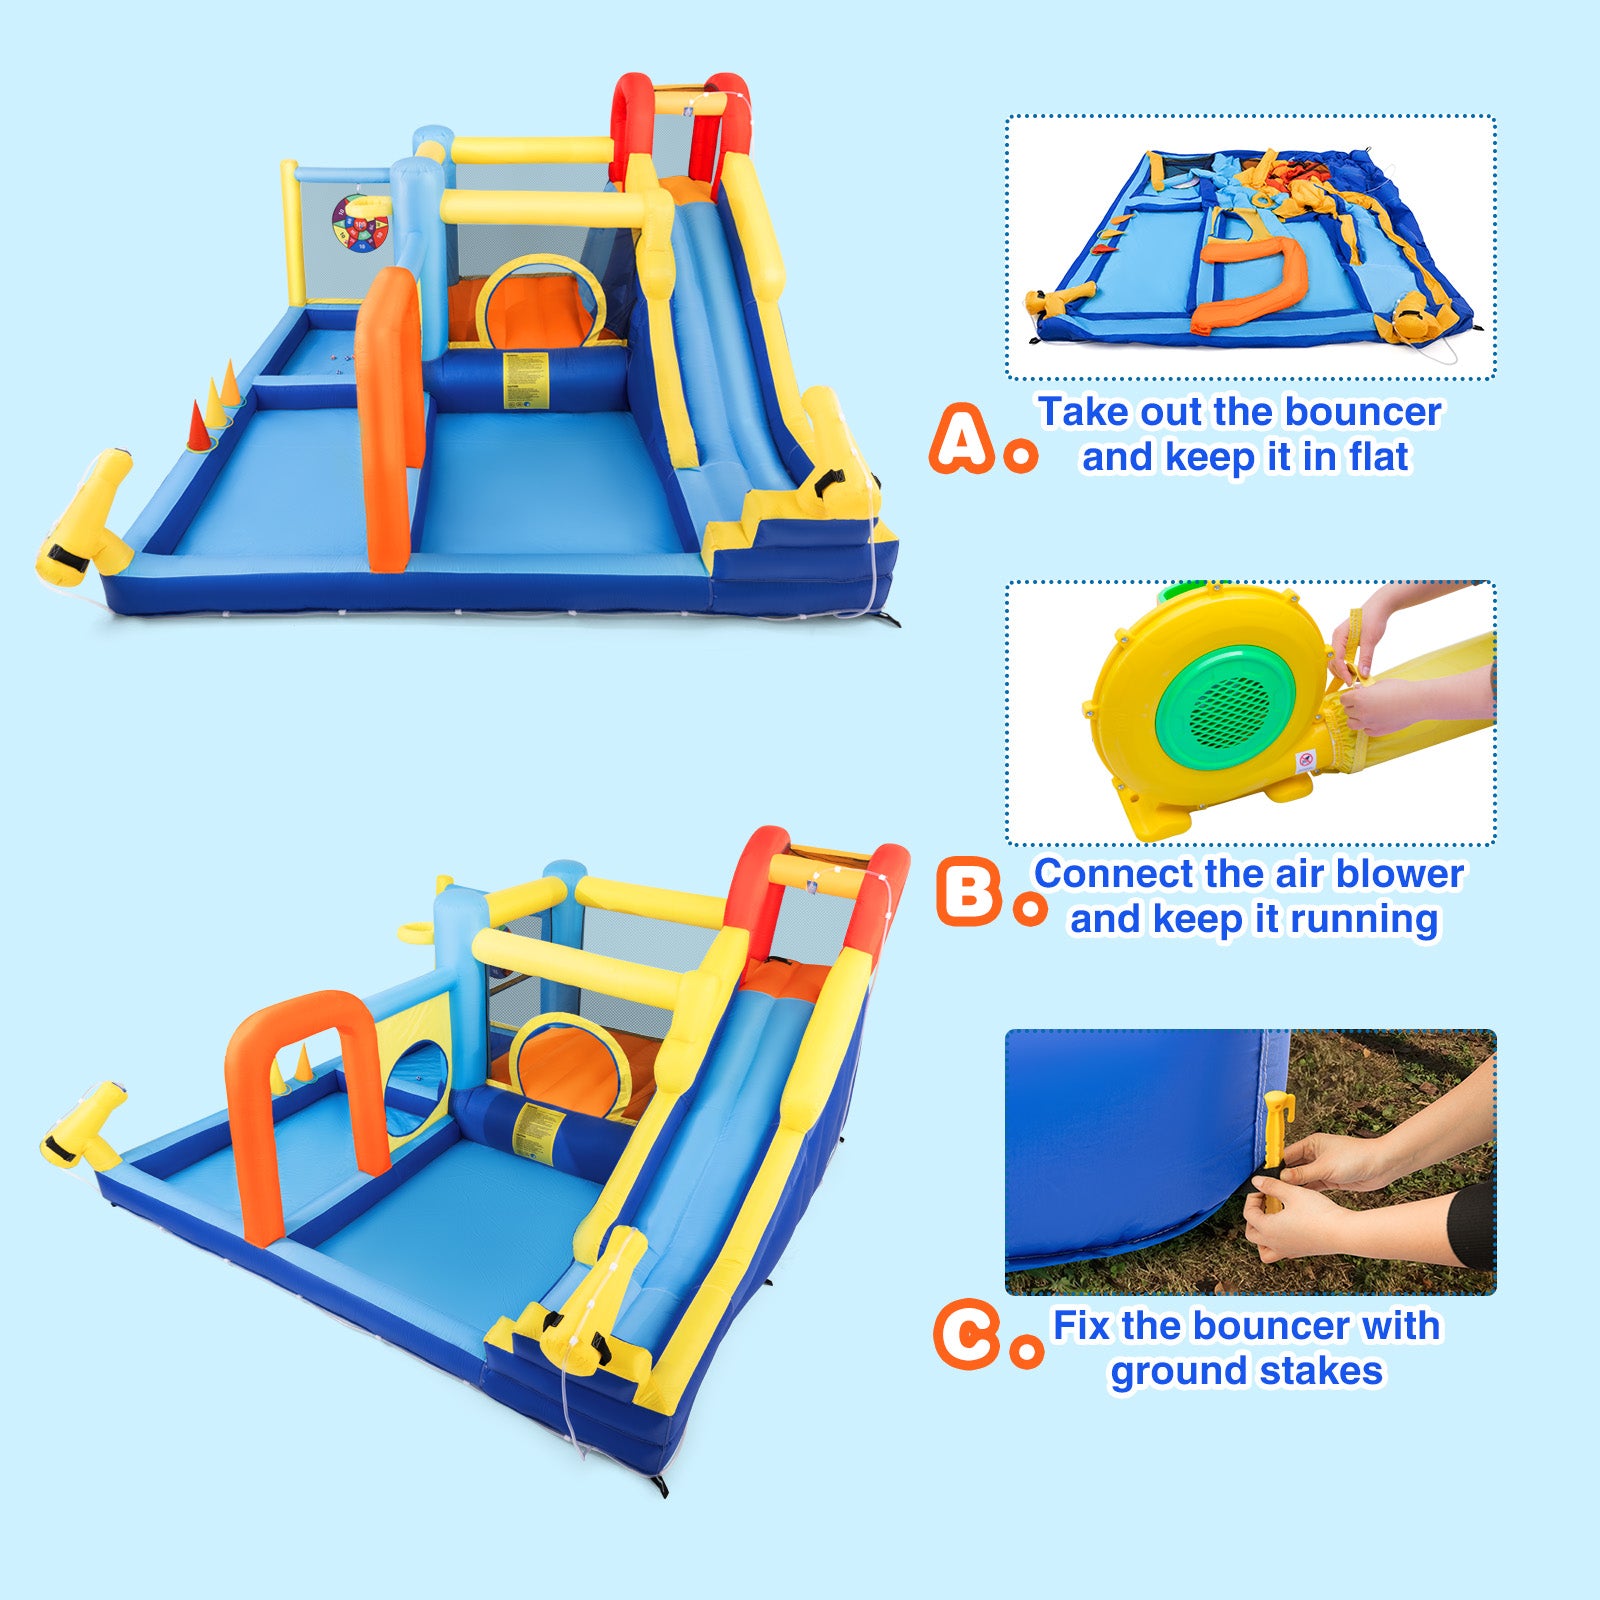 #1203 Inflatable Water Slide,Water Park Bounce House,Slide Bouncer Castle Playhouse w/Splash Pool, Climbing Wall, Trampoline，Felt Ball Target, Ring Toss Game for Kids Outdoor Fun, 550W Air Blower